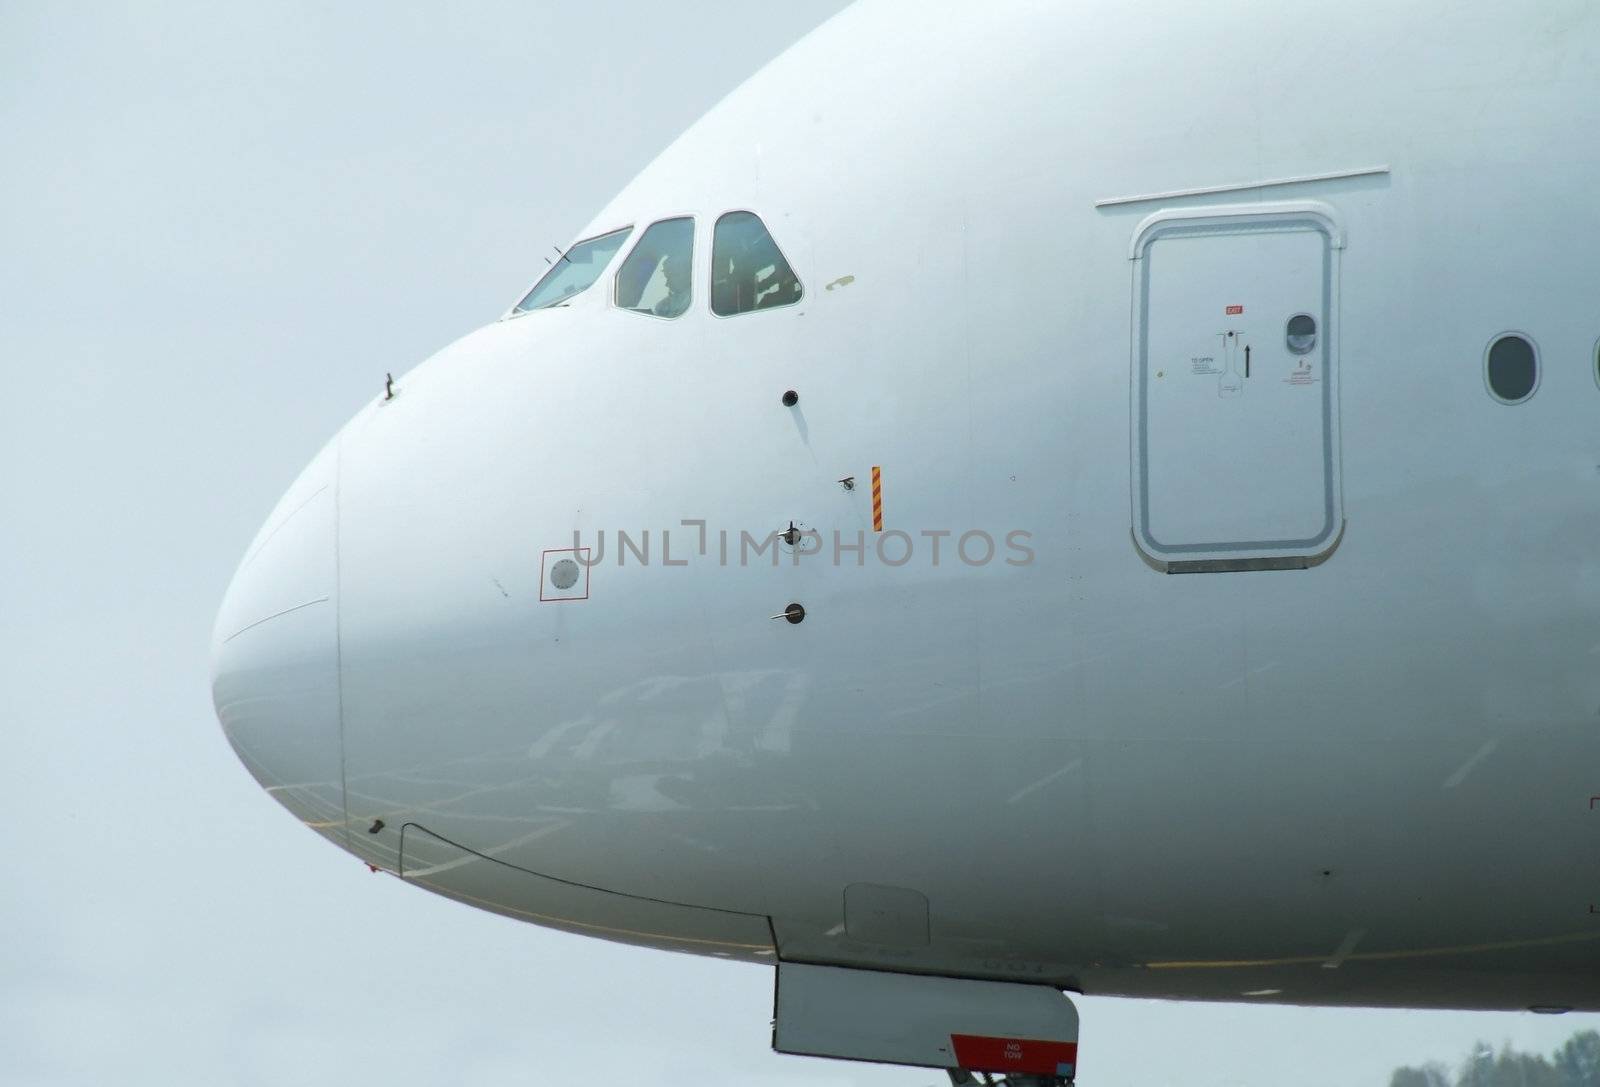 Nose of very big, wide-body airliner on the ground